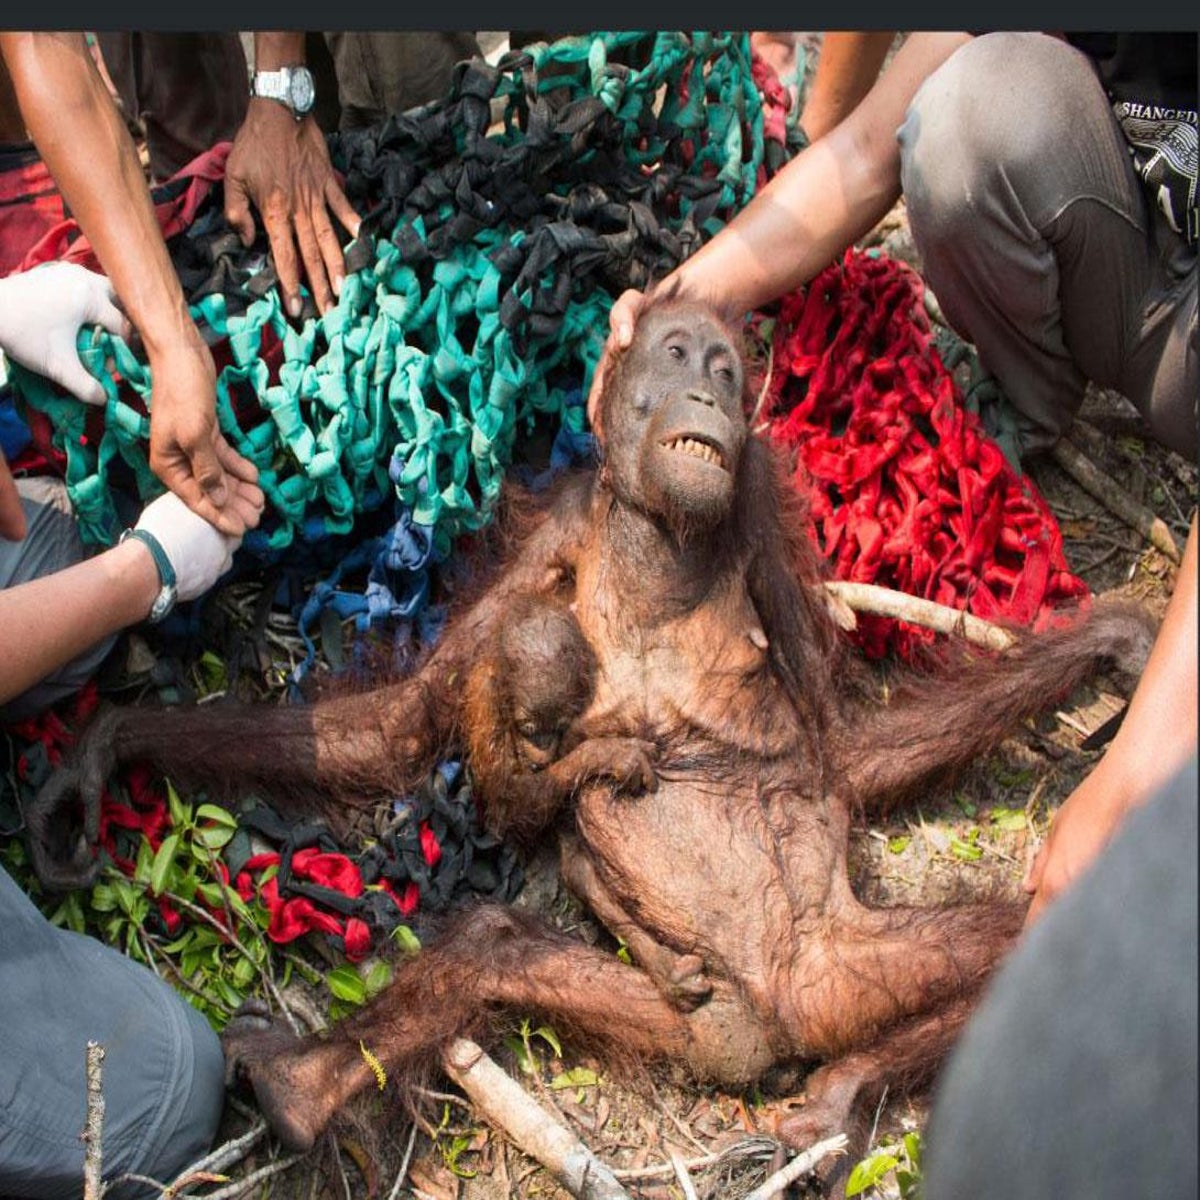 Orangutans face complete extinction within 10 years, animal rescue